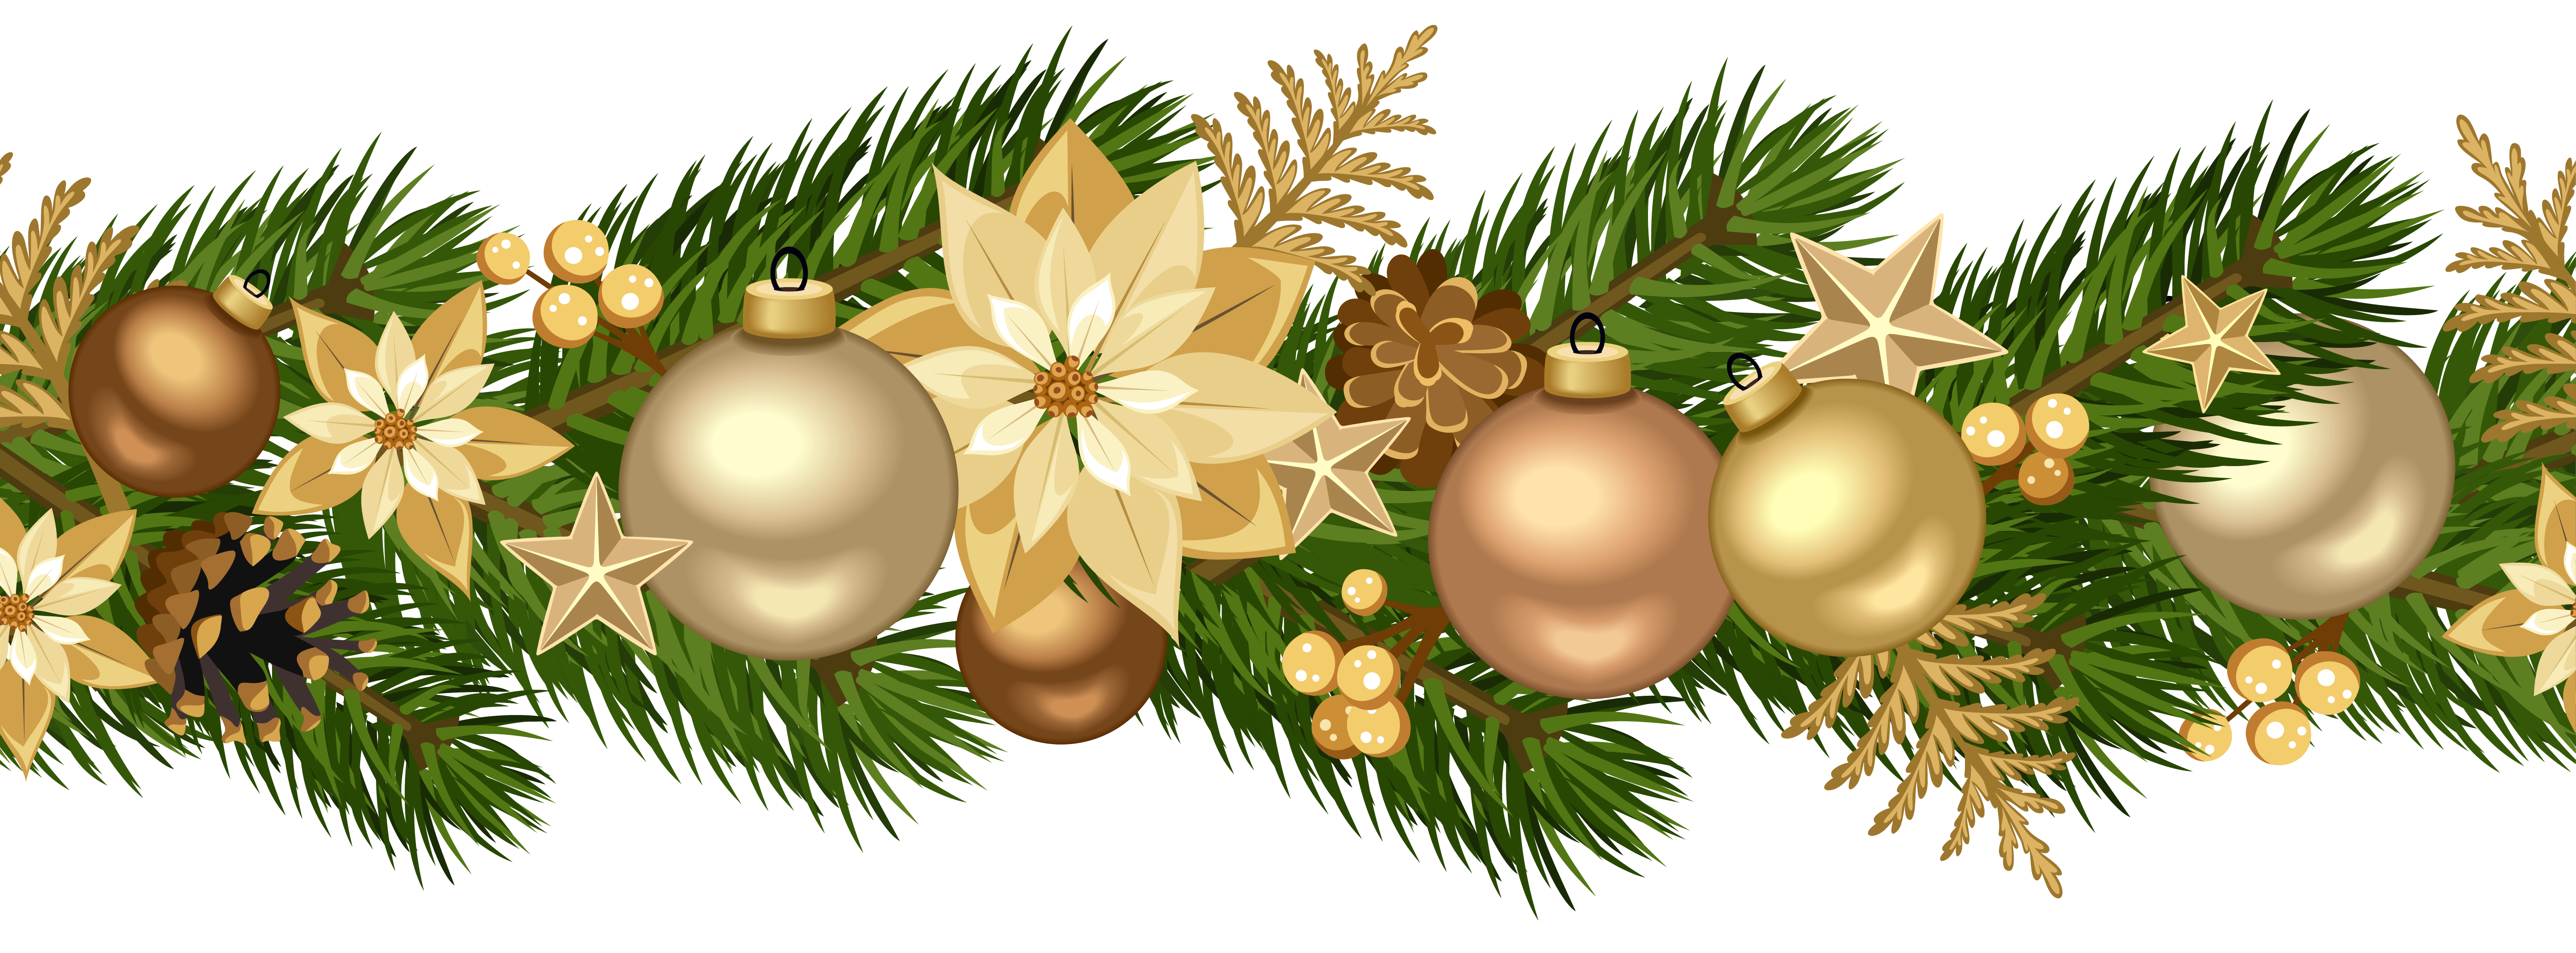 christmas decorative golden garland png clip art image gallery yopriceville high quality images and transparent png free clipart